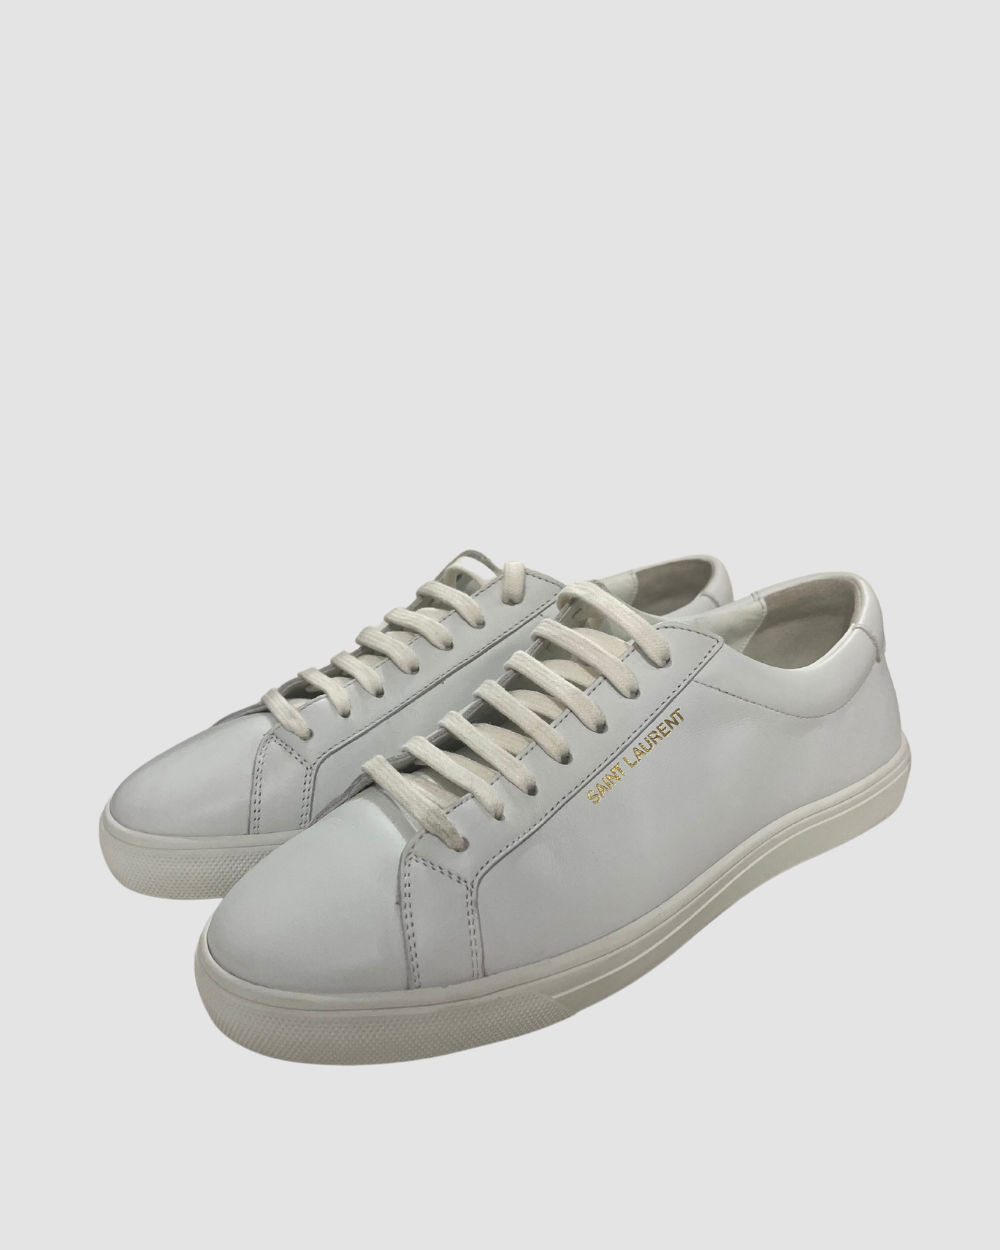 Saint Laurent White Leather Low Top Sneakers